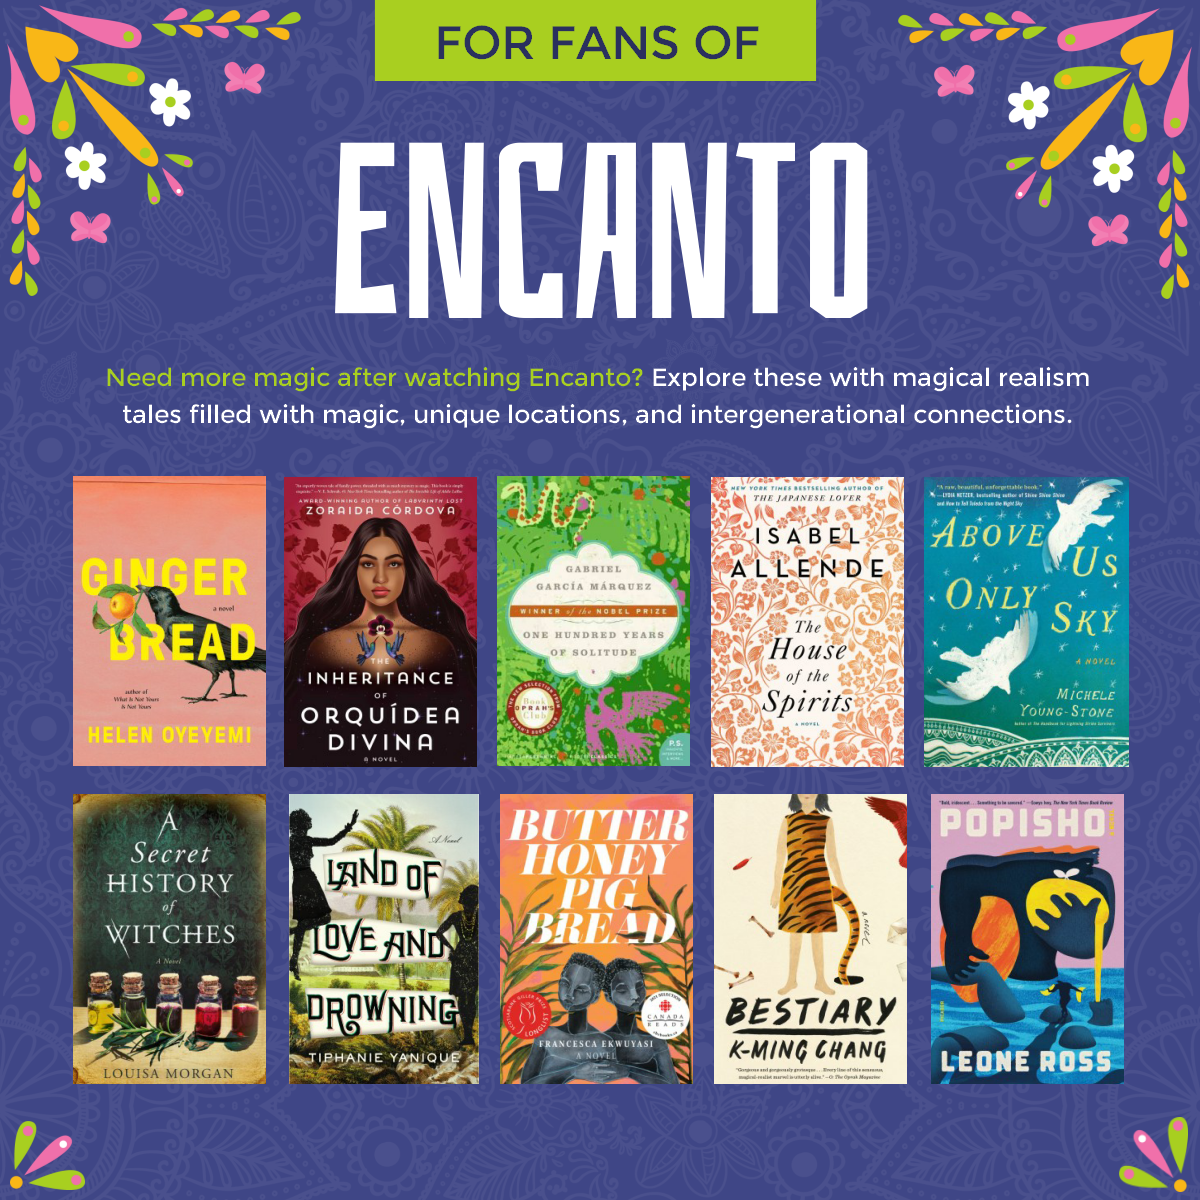 link to booklist "For Fans of Encanto"